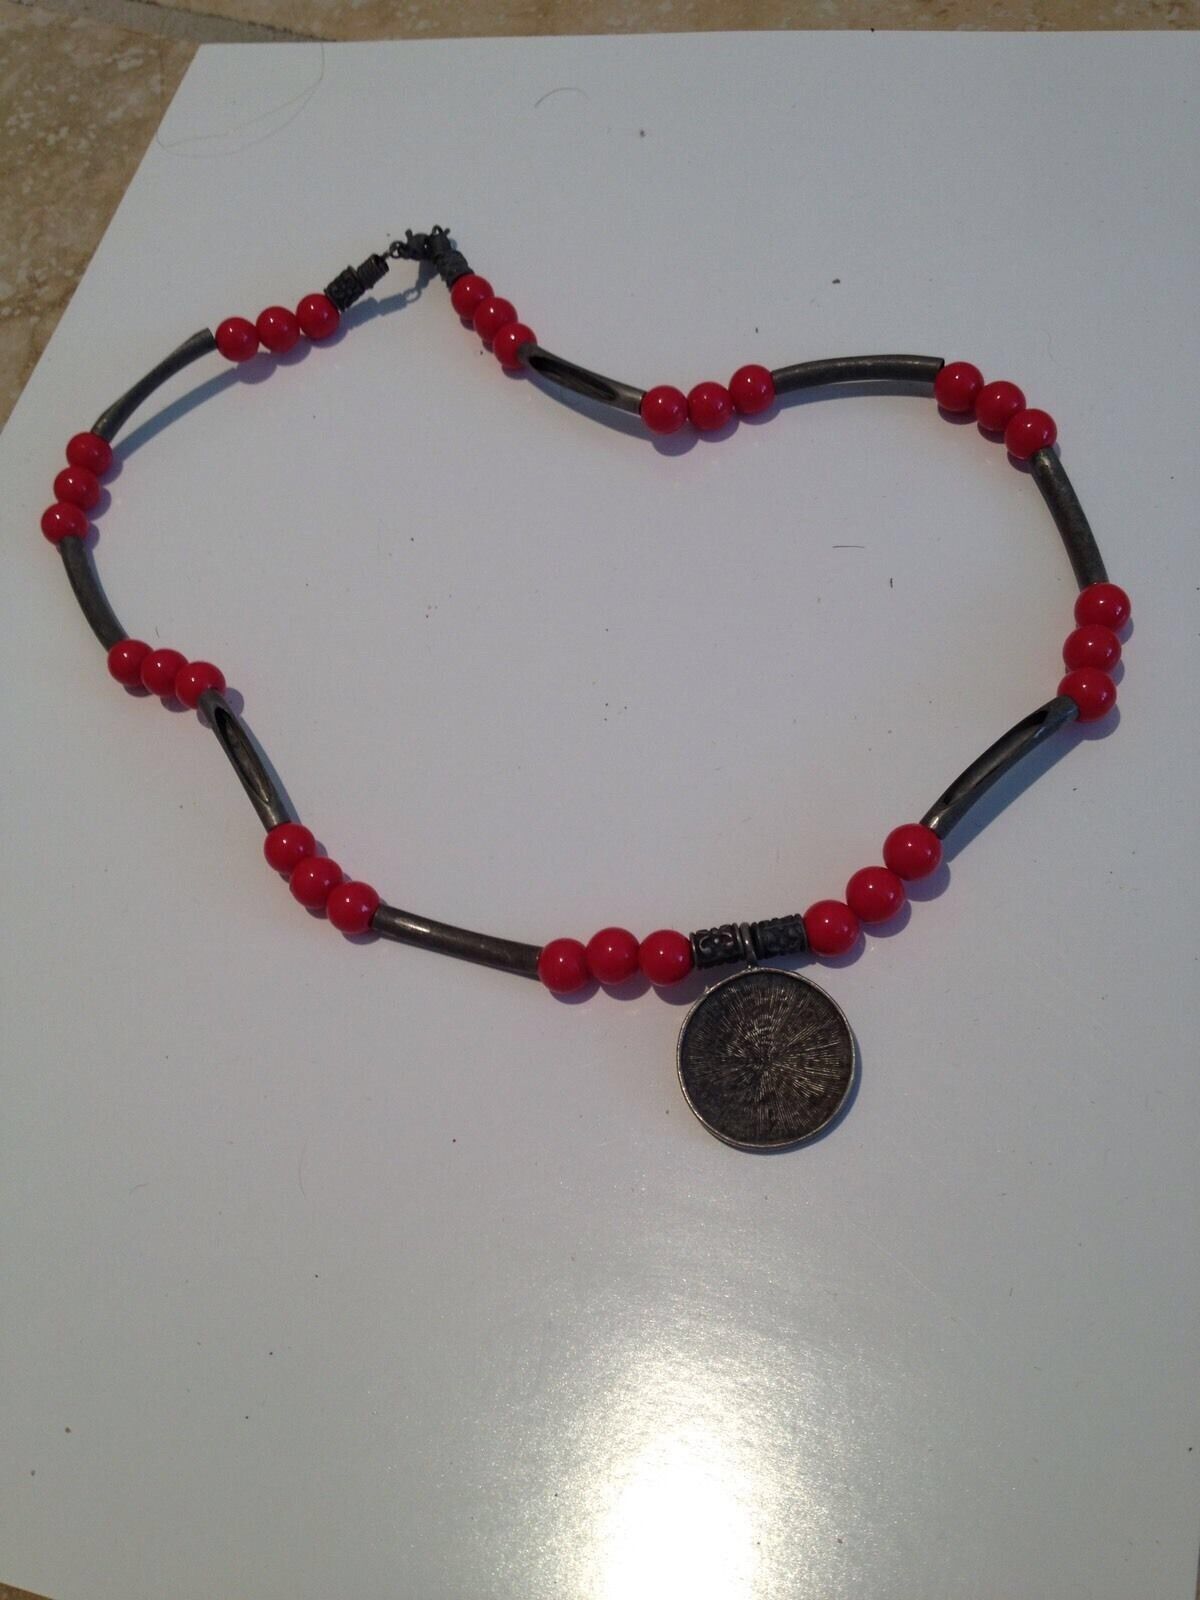 [Alternative dealer] Rustic Beaded Red Necklace With Popular shop is the lowest price challenge Medallion 19”